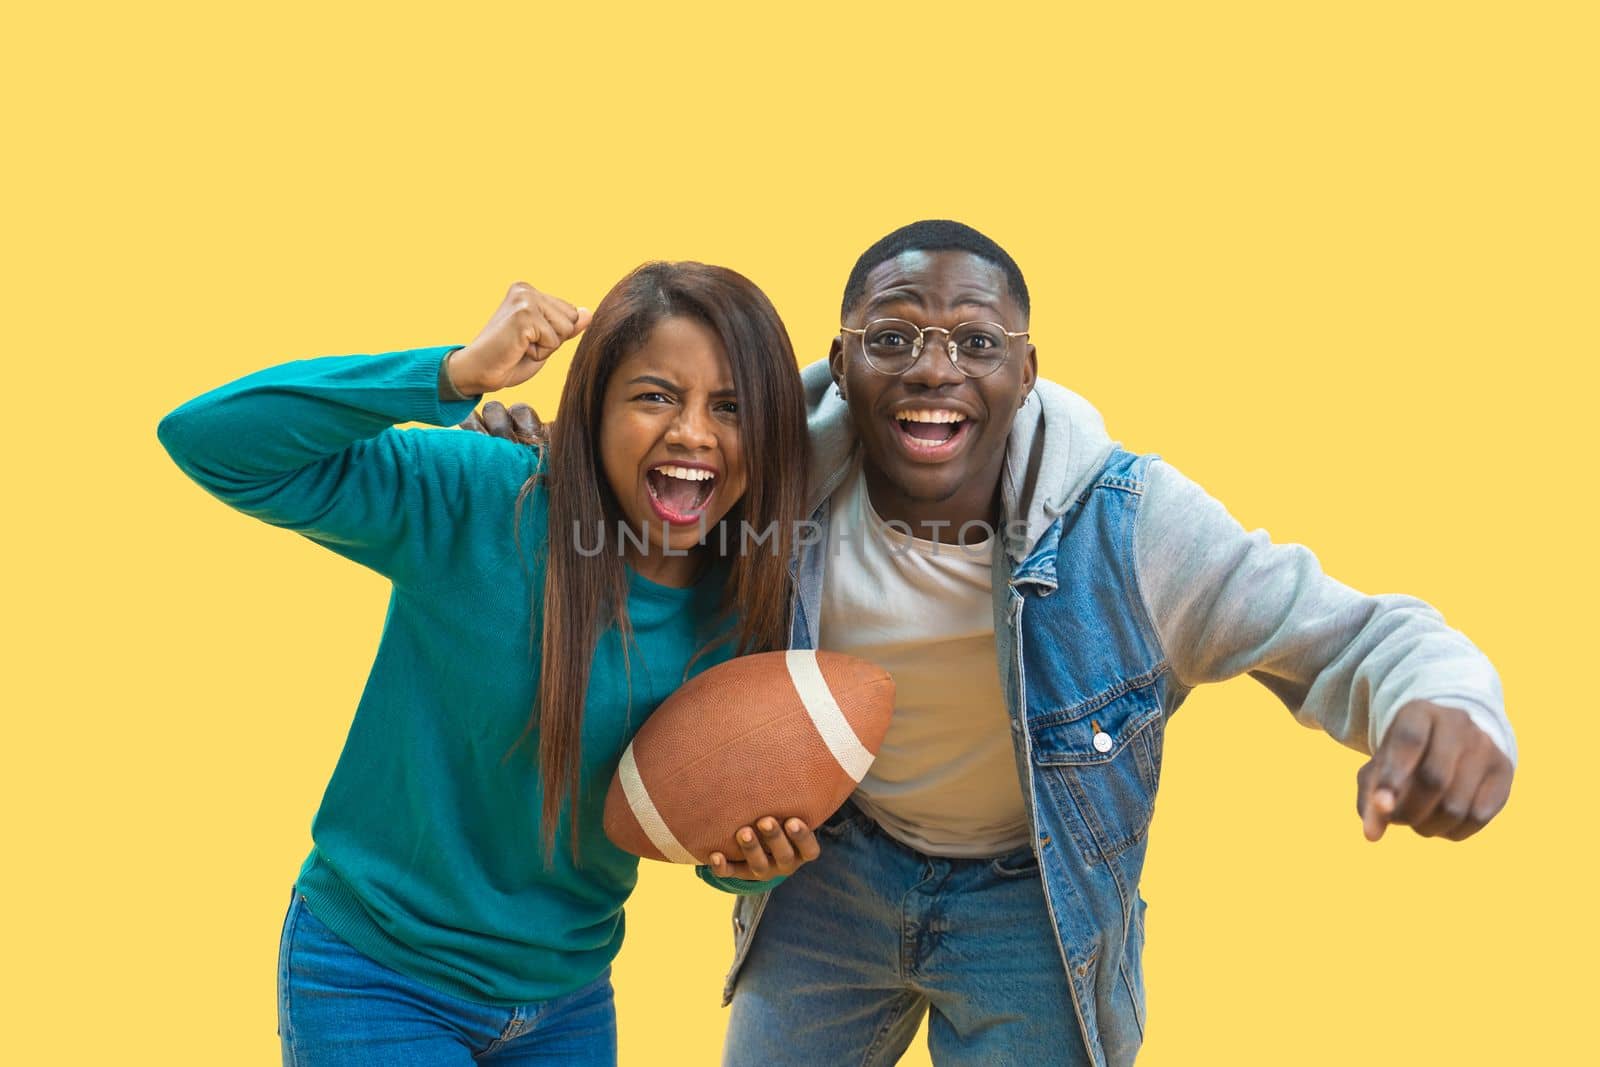 Excited ethnic diversity couple enjoying sports together isolated on a yellow background looking at camera with a American football ball in their hands. Happy football fans concept. High quality photo